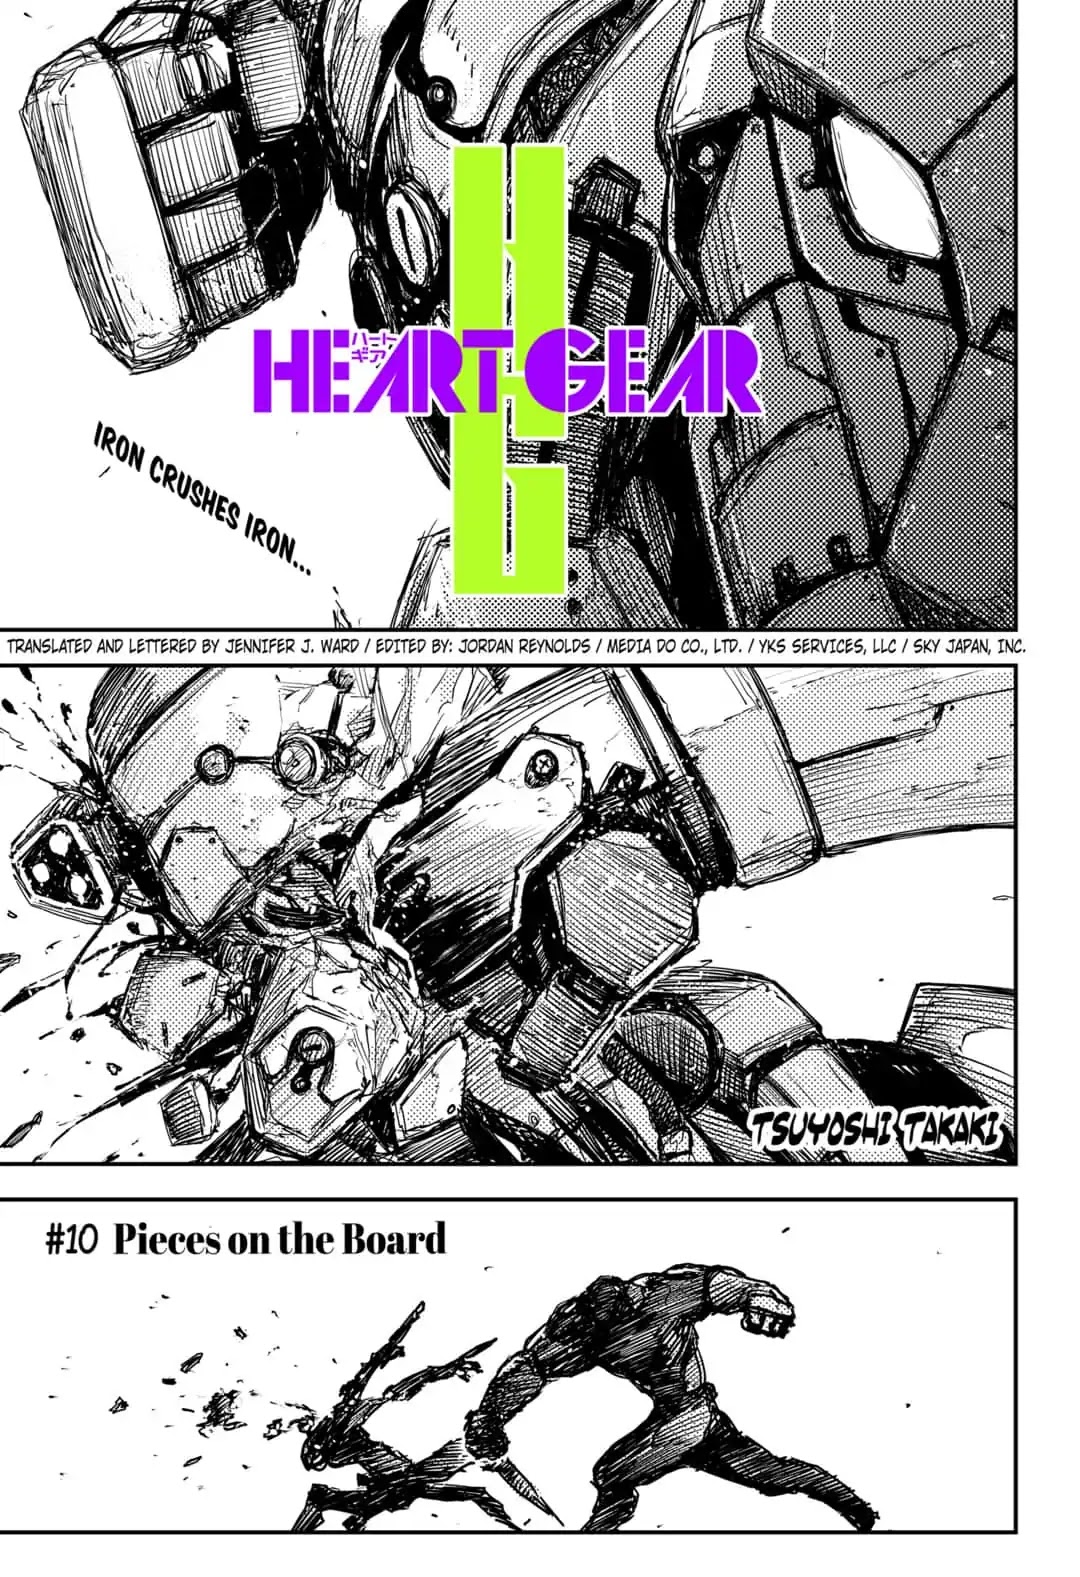 HEART GEAR Chapter 10: #10 Pieces on the Board